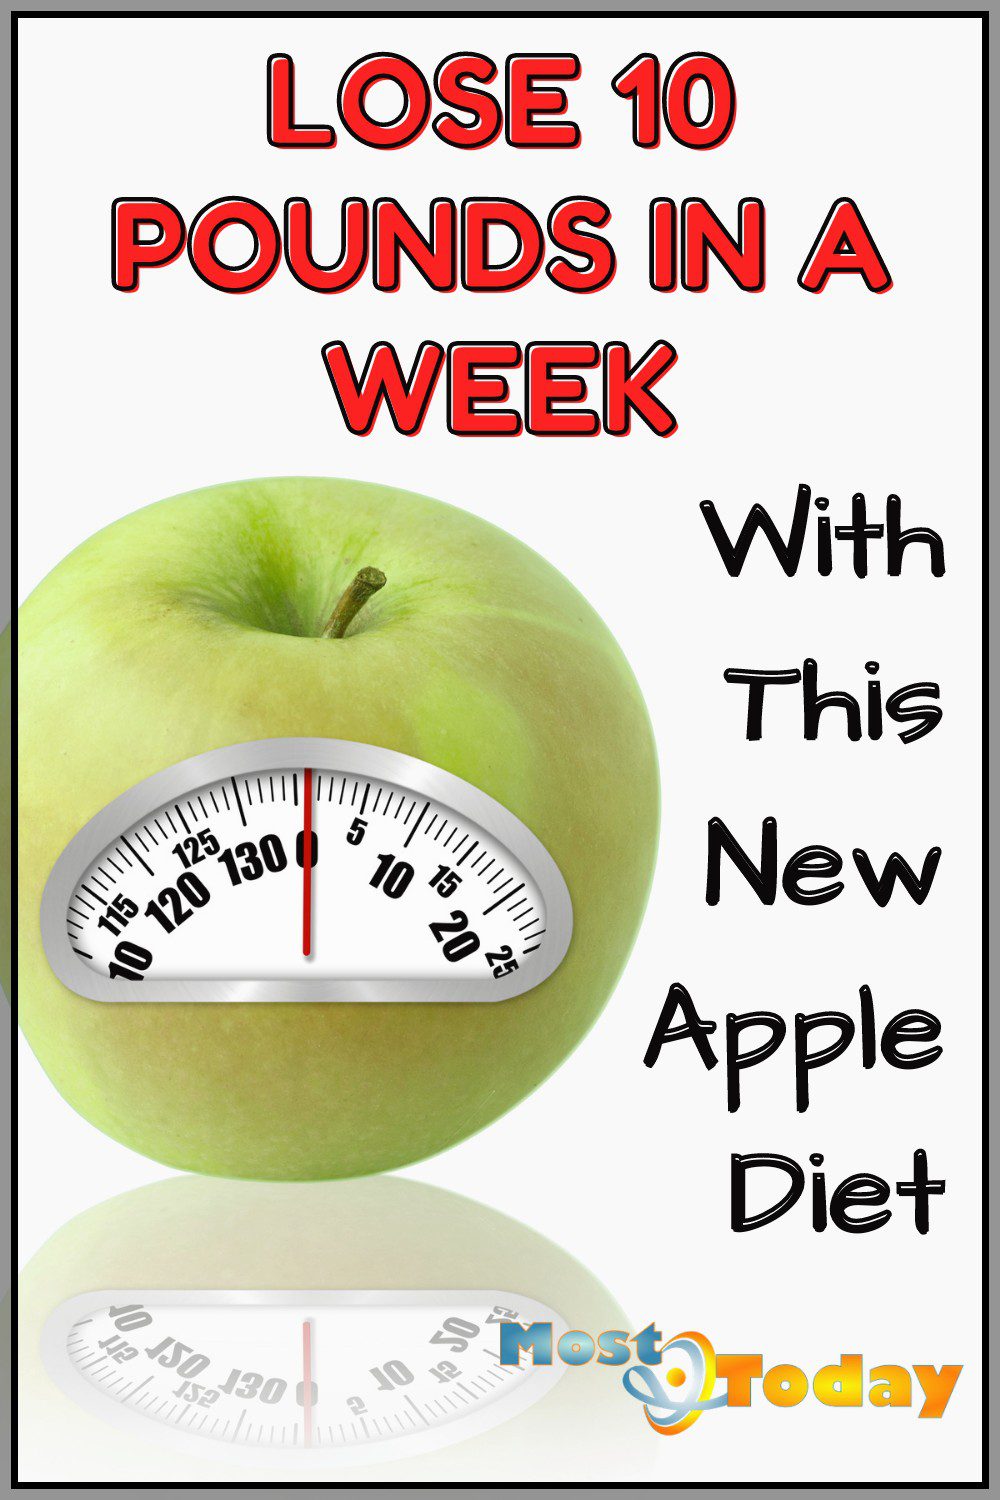 Best New Apple Diet How To Lose 10 Pounds In A Week